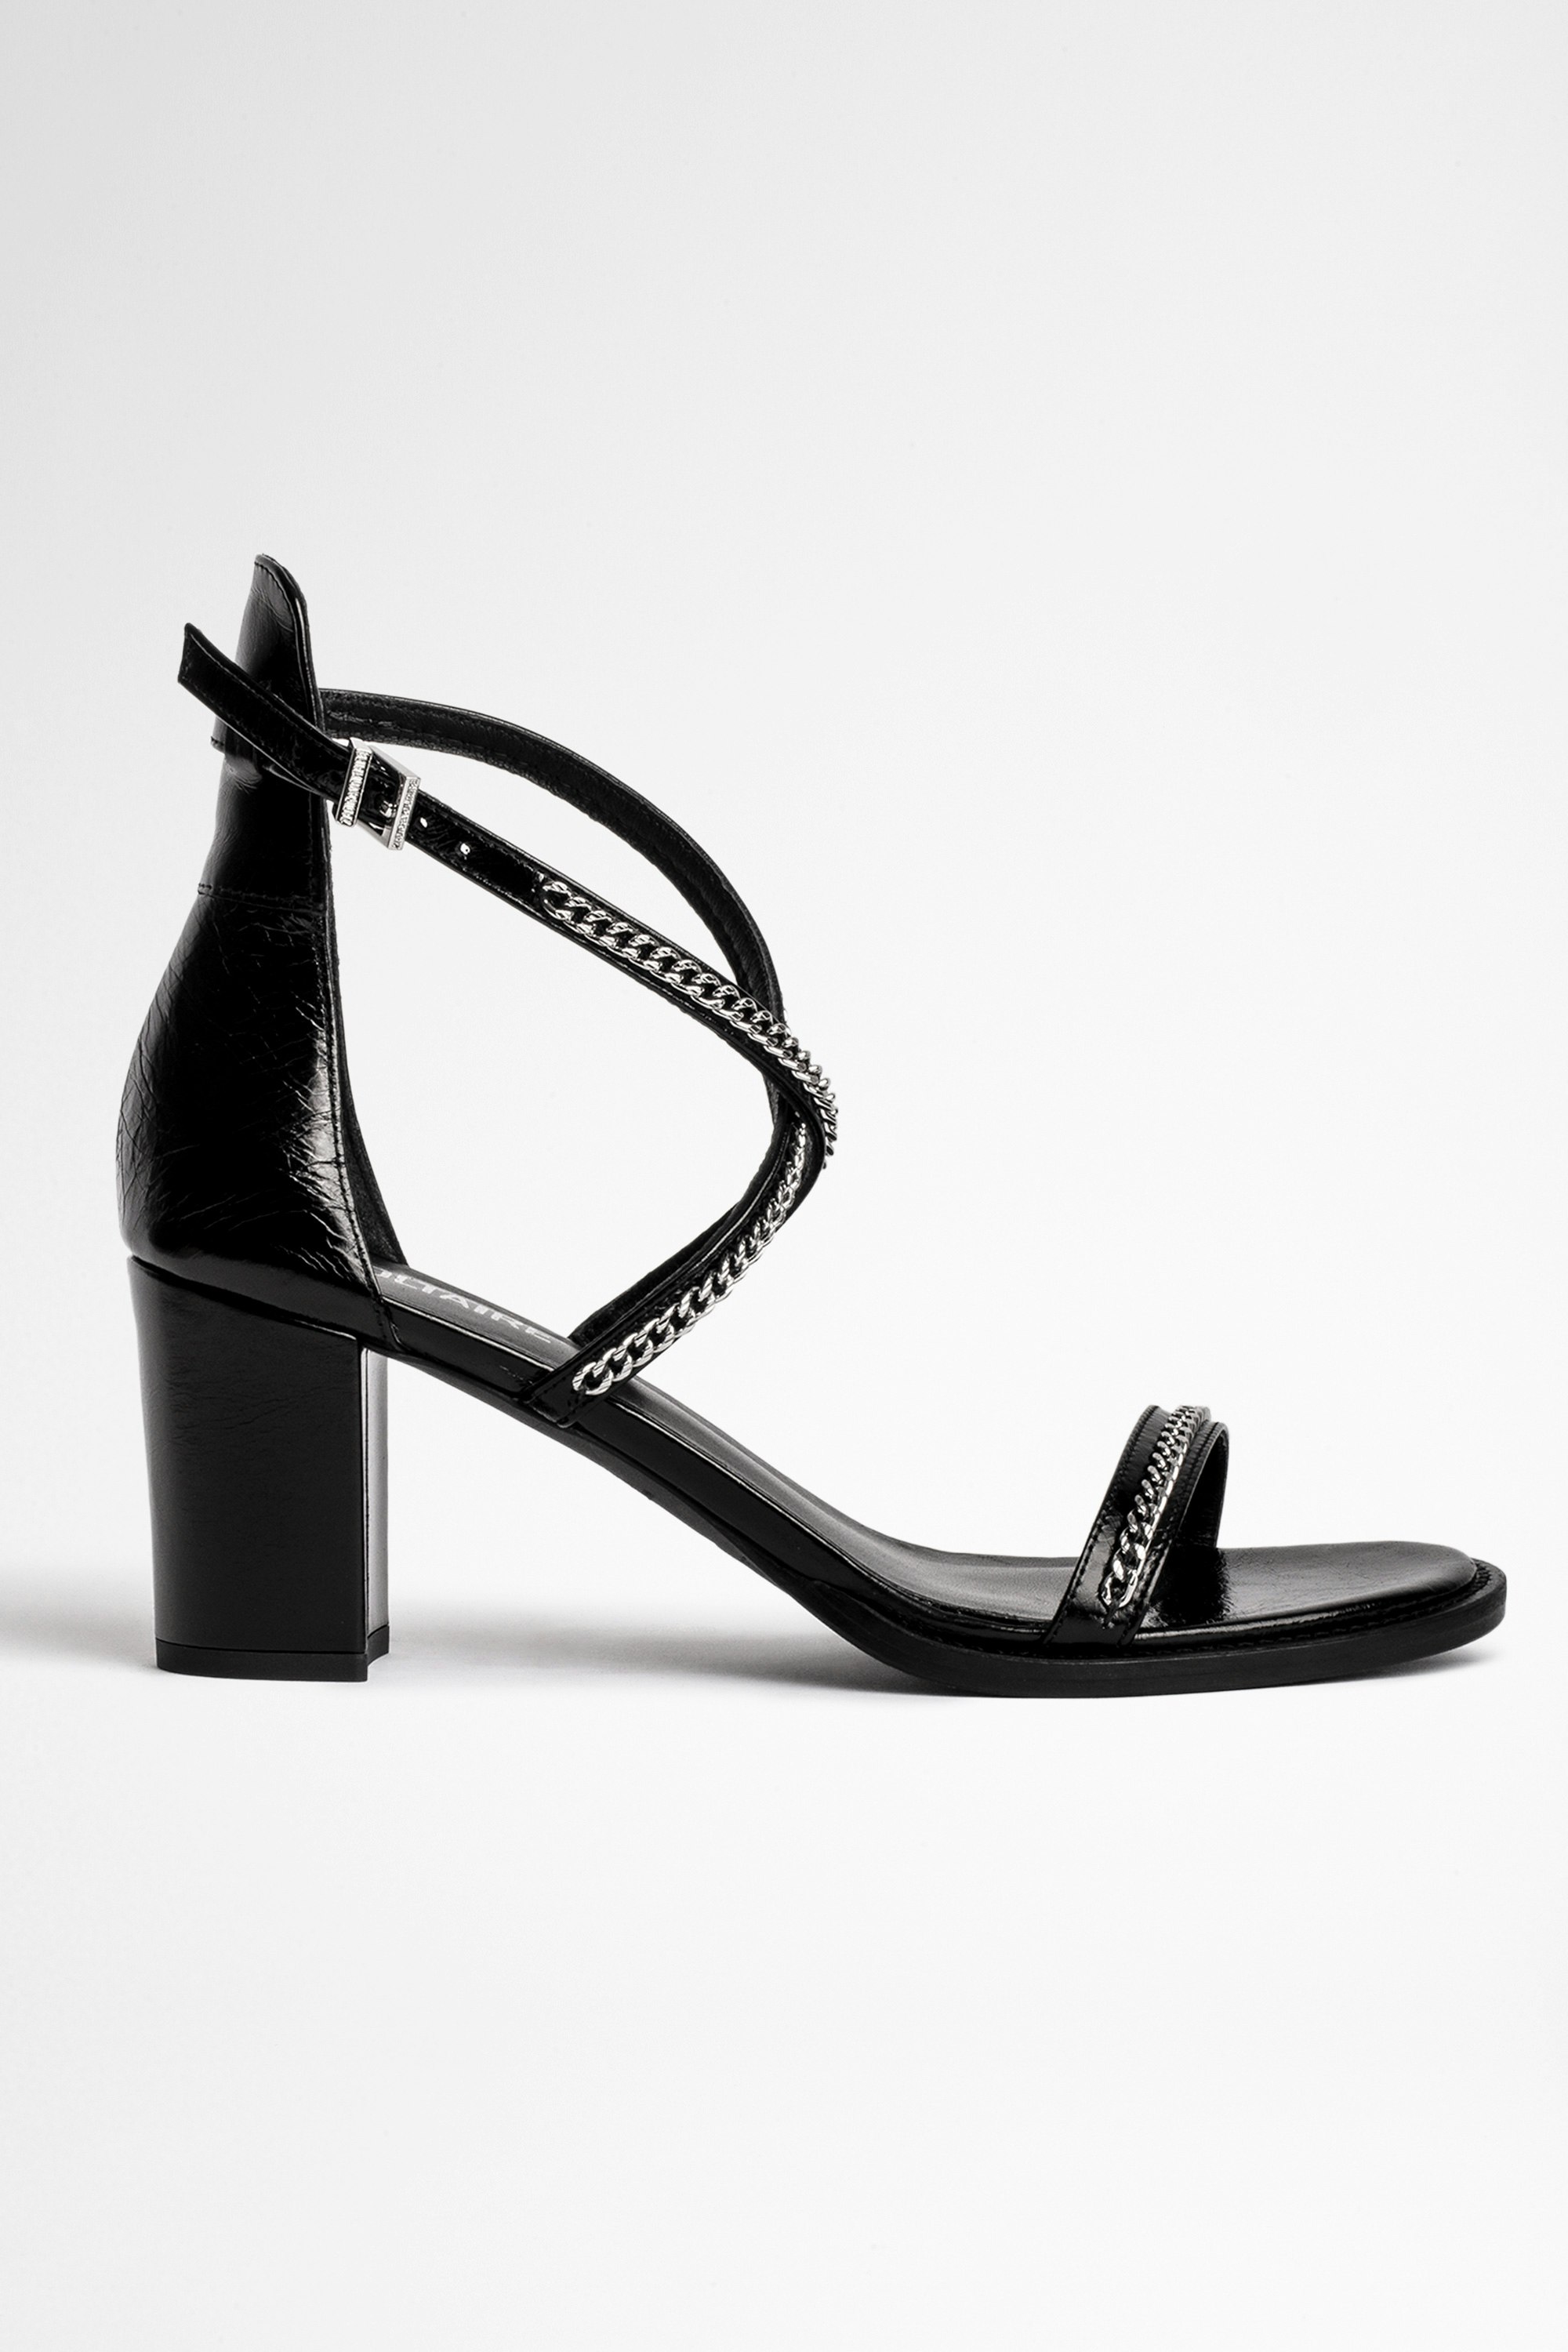 May レザーサンダル Women's black leather sandals with heels and chain straps